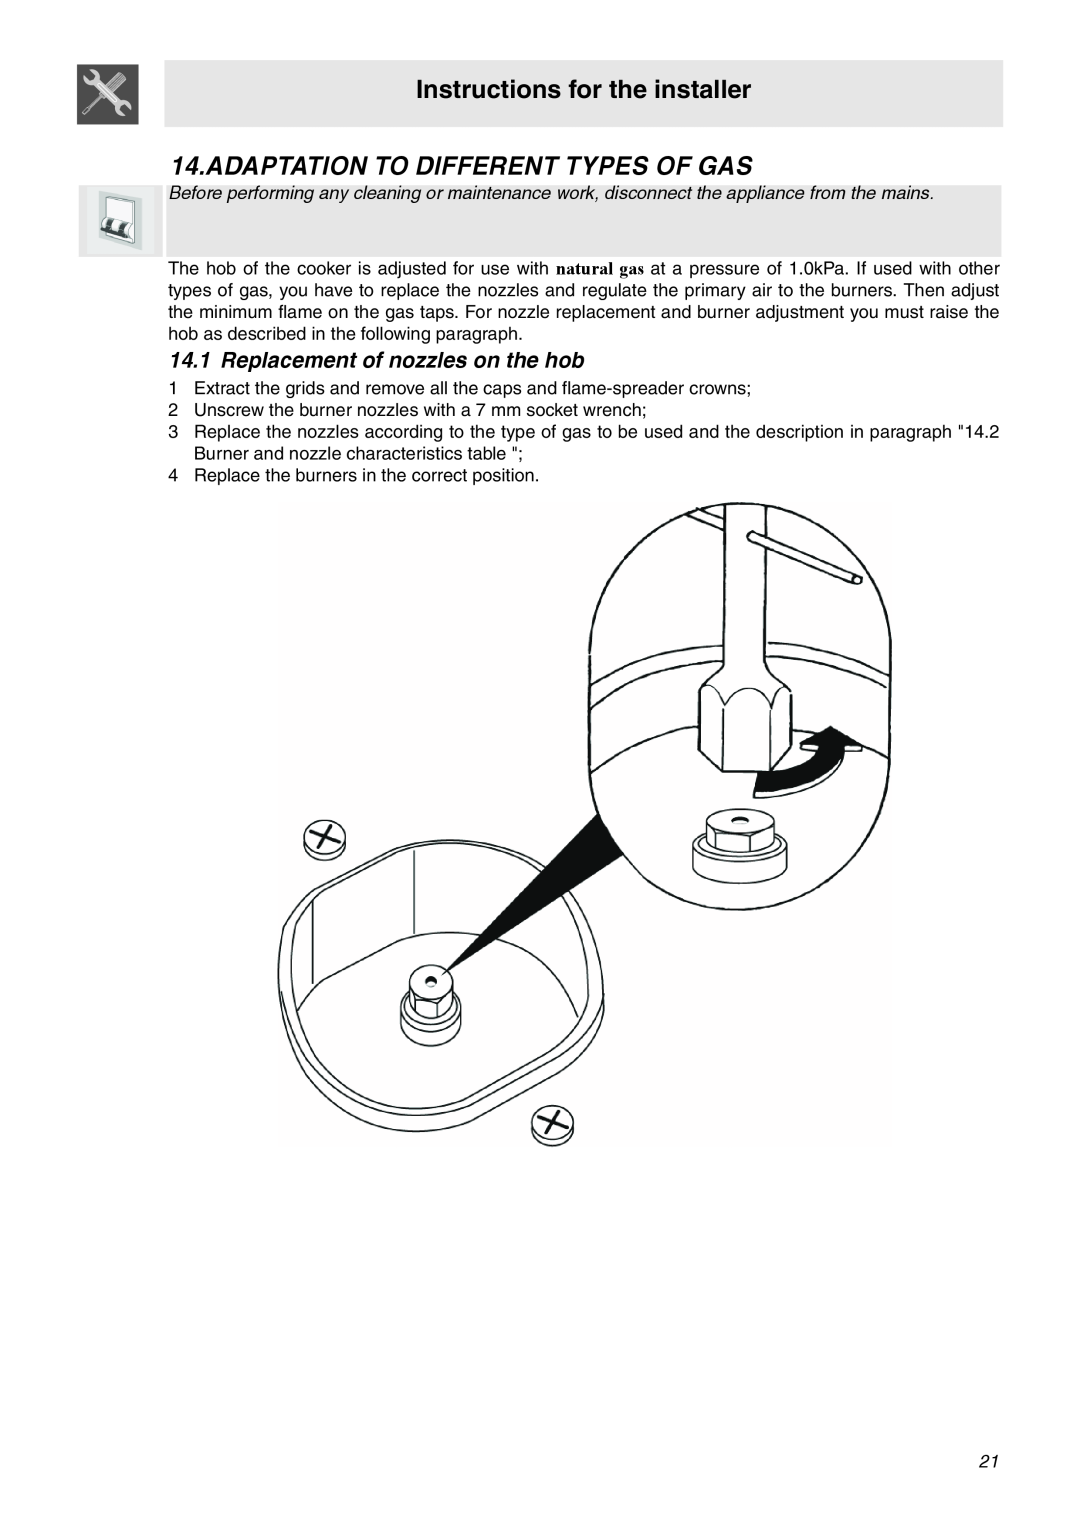 Smeg SA92MFX5 Adaptation To Different Types Of Gas, Replacement of nozzles on the hob, Instructions for the installer 